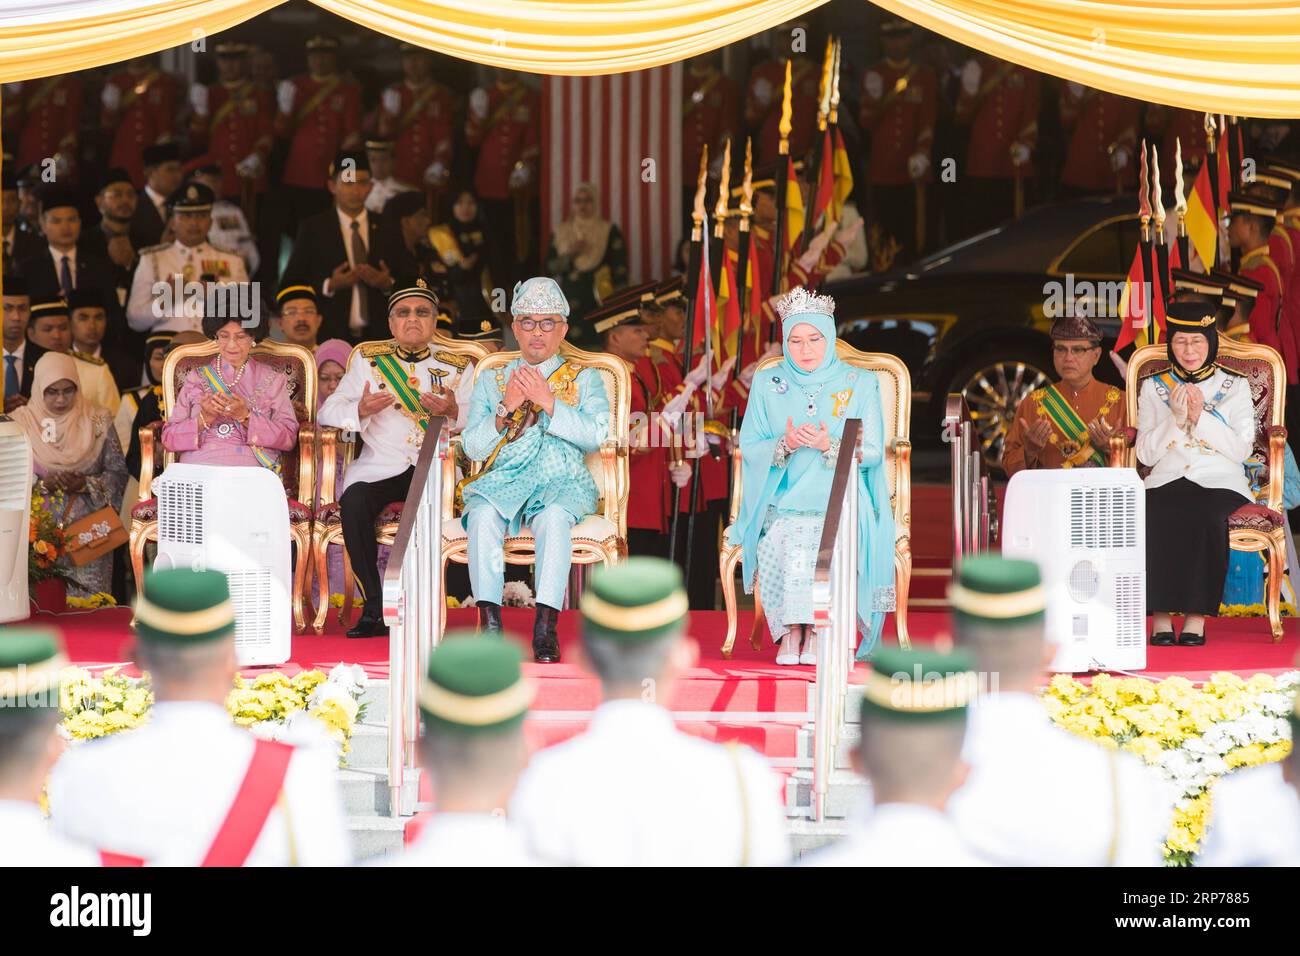 (190131) -- KUALA LUMPUR, Jan. 31, 2019 (Xinhua) -- Sultan Abdullah Sultan Ahmad Shah (L, front) prays during the welcome ceremony at the parliament square in Kuala Lumpur, Malaysia, Jan. 31, 2019. Sultan Abdullah Sultan Ahmad Shah was sworn in as Malaysia s 16th king in a ceremony at the national palace on Thursday. Malaysia is a constitutional monarchy, with nine sultans or rulers, who head their respective state and act as the religious leader, taking turns to serve as the king for a five-year term. (Xinhua/Zhu Wei) MAYLASIA-KUALA LUMPUR-NEW KING PUBLICATIONxNOTxINxCHN Stock Photo